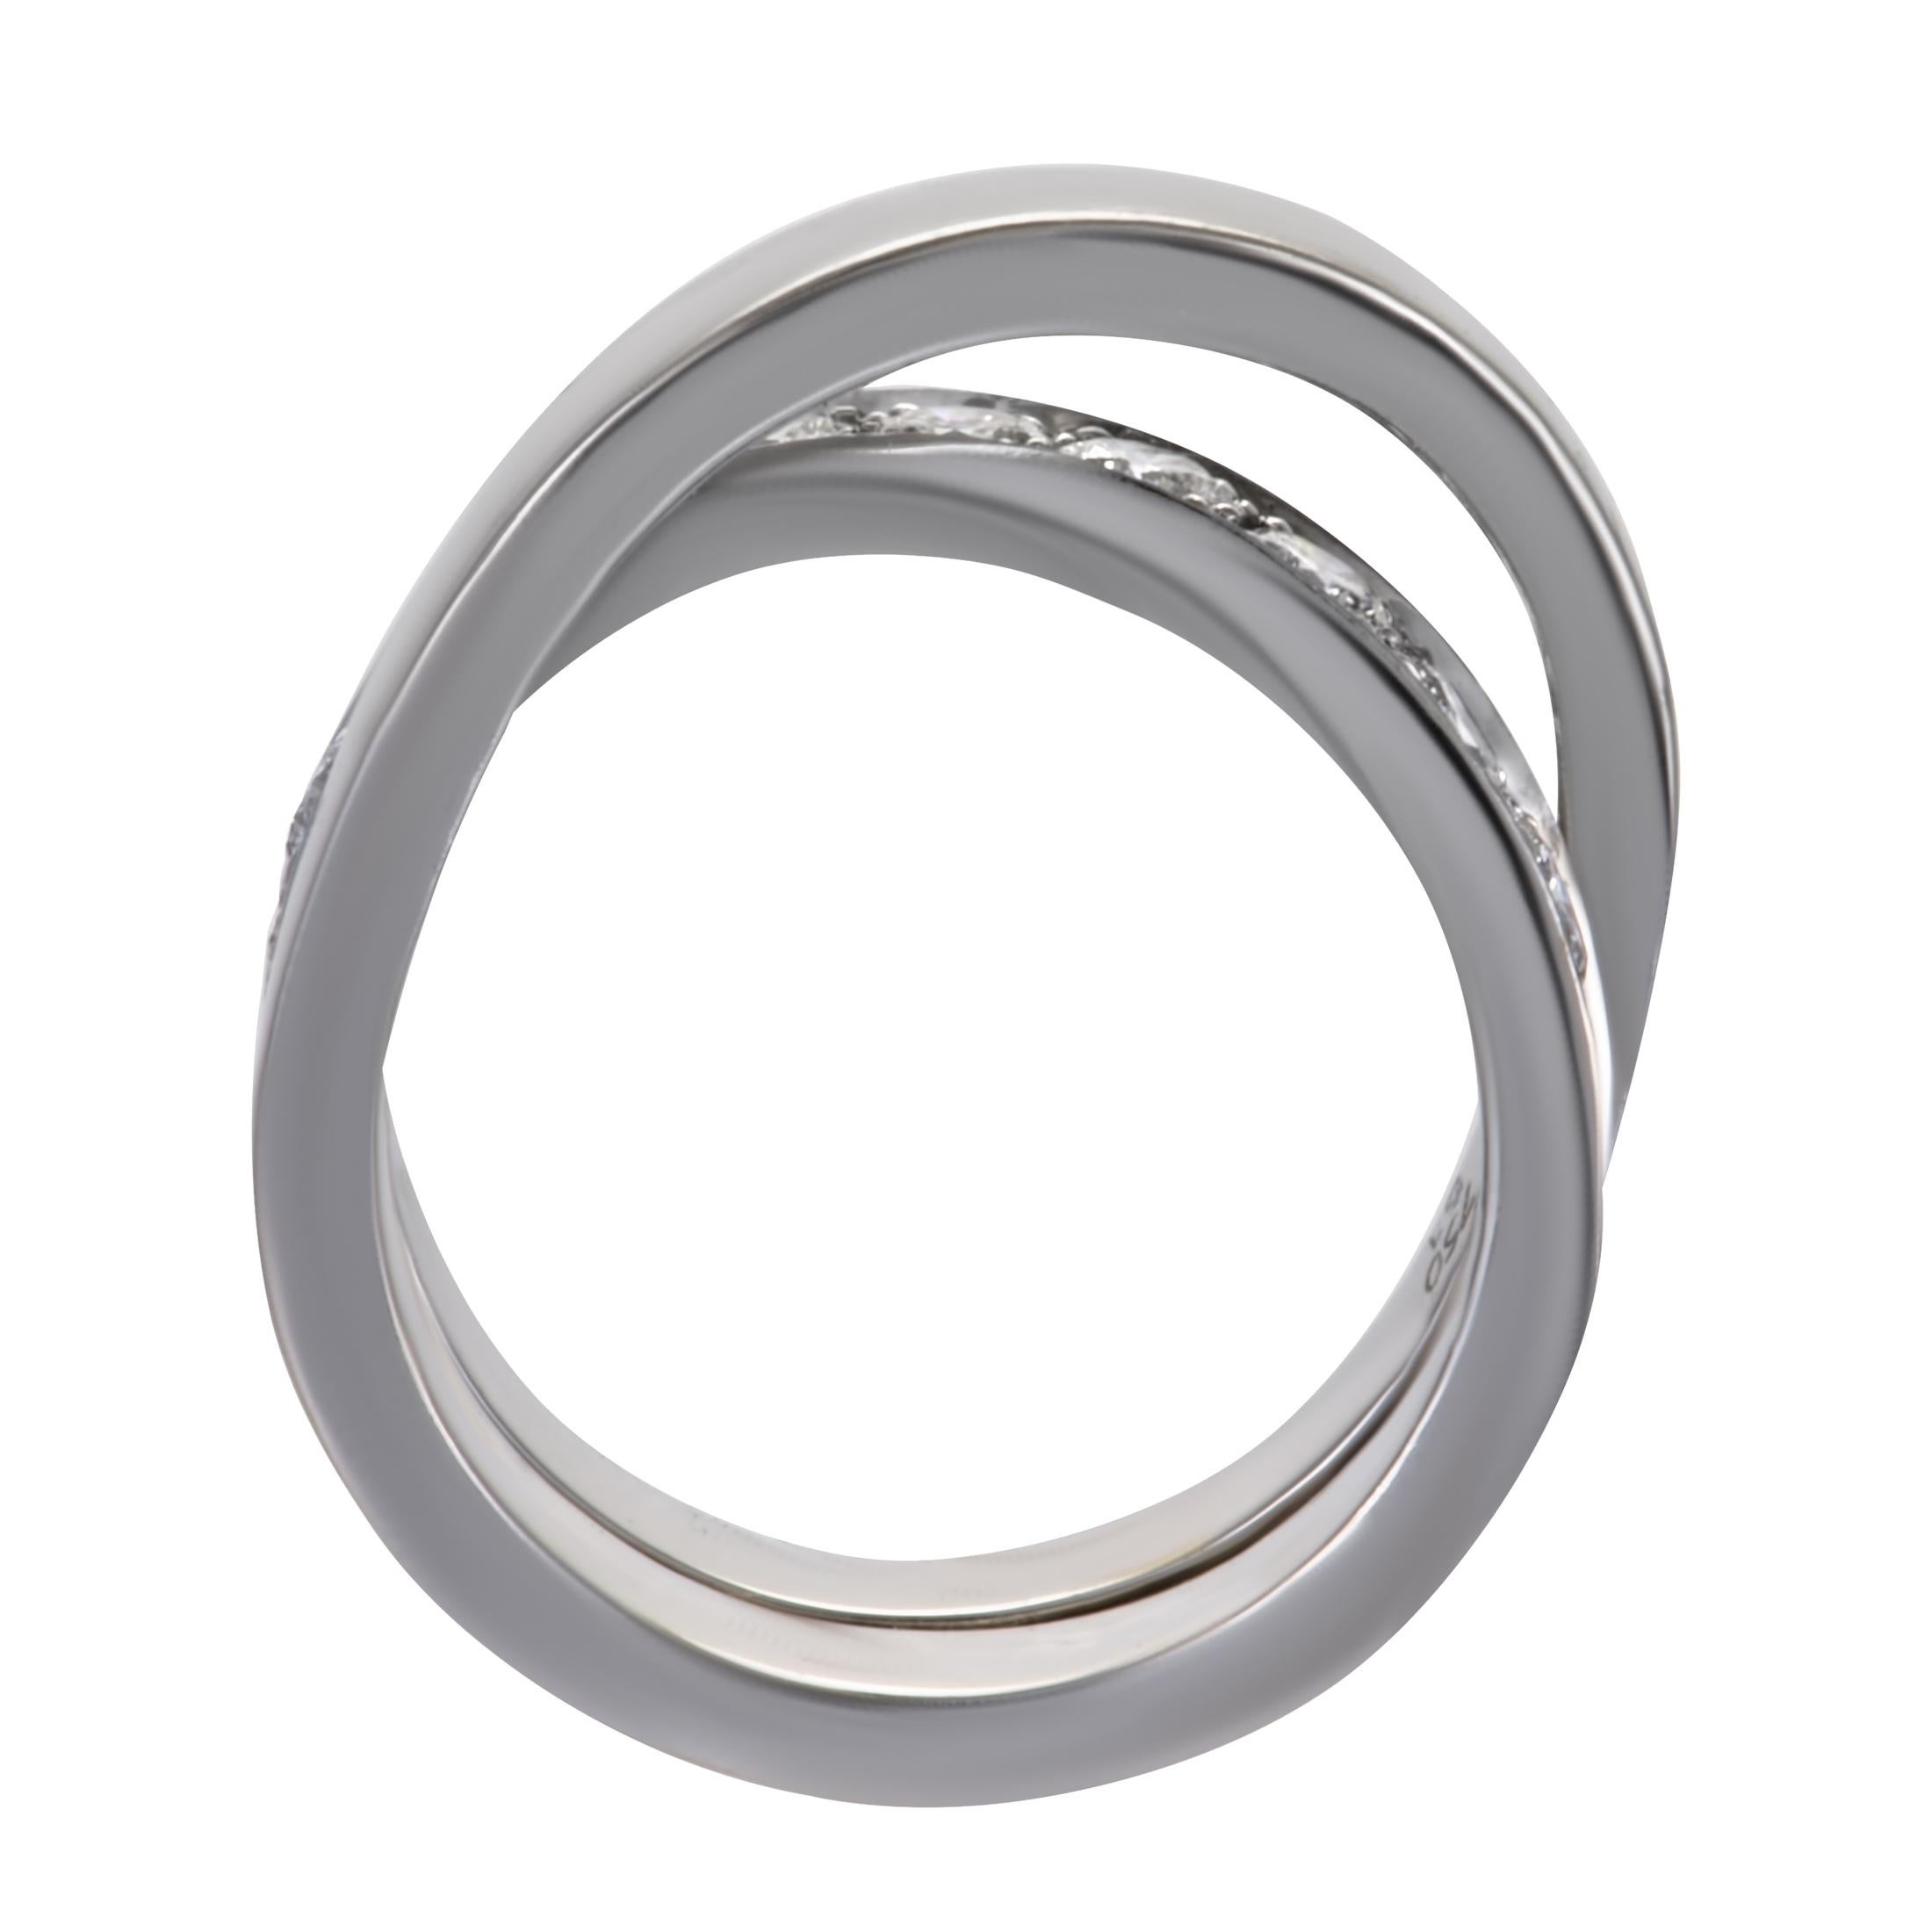 Showcasing their expertise in designing exceptionally elegant shapes, bringing them to life in sublime fashion and adorning them in a tastefully subtle manner, Cartier created this fantastic 18K white gold ring which is exquisitely set with